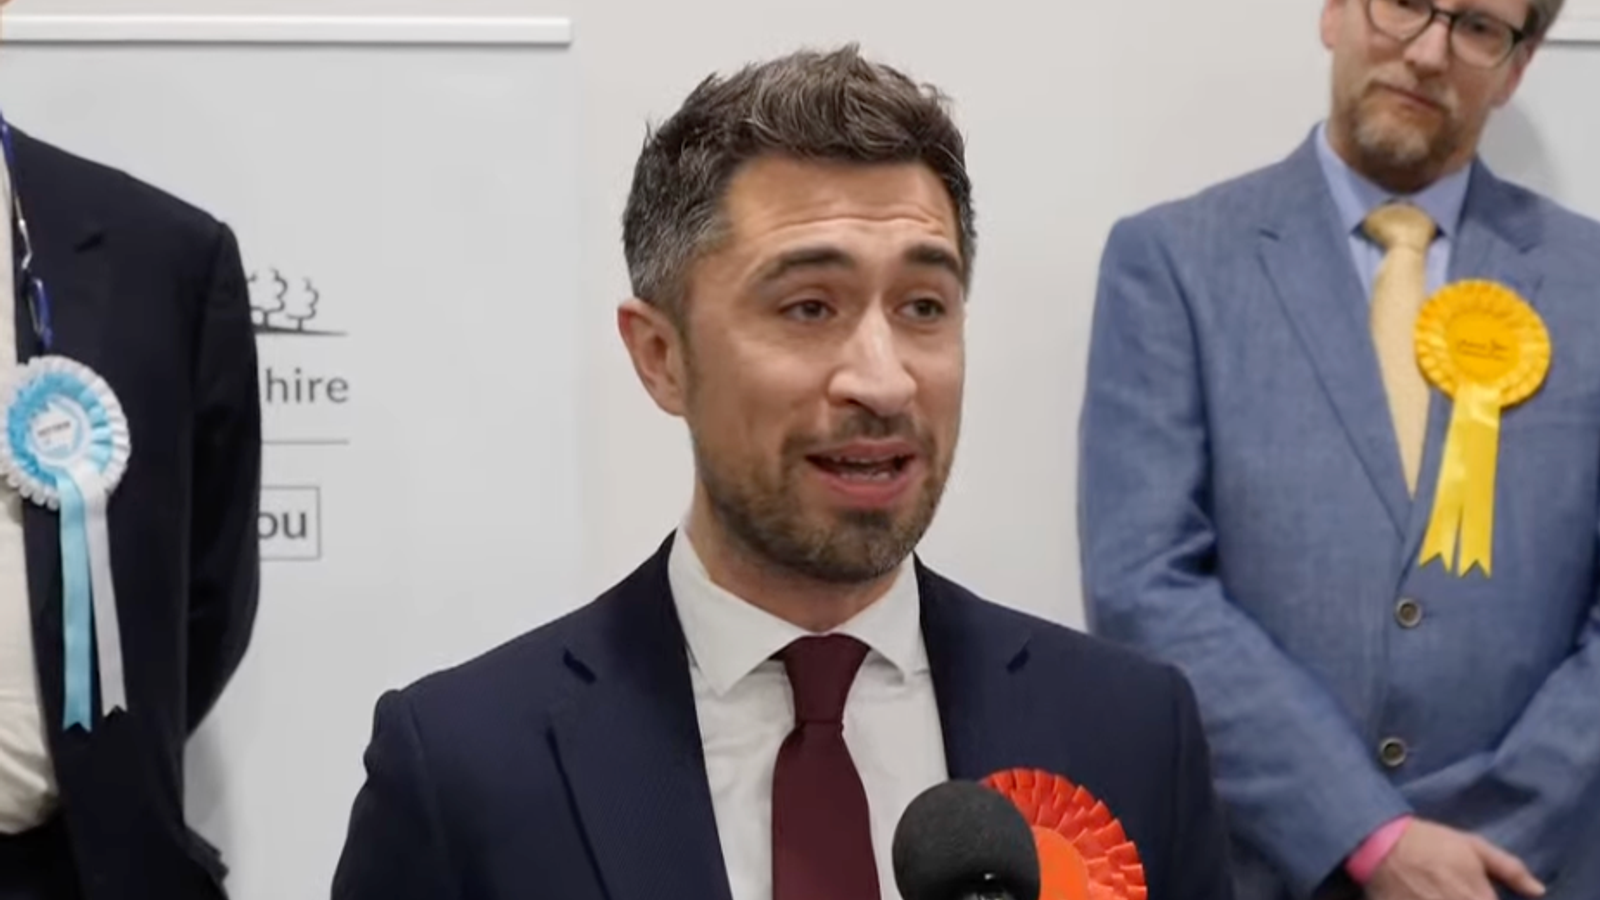 Kingswood by-election result: Another defeat for Rishi Sunak as Labour wins seat